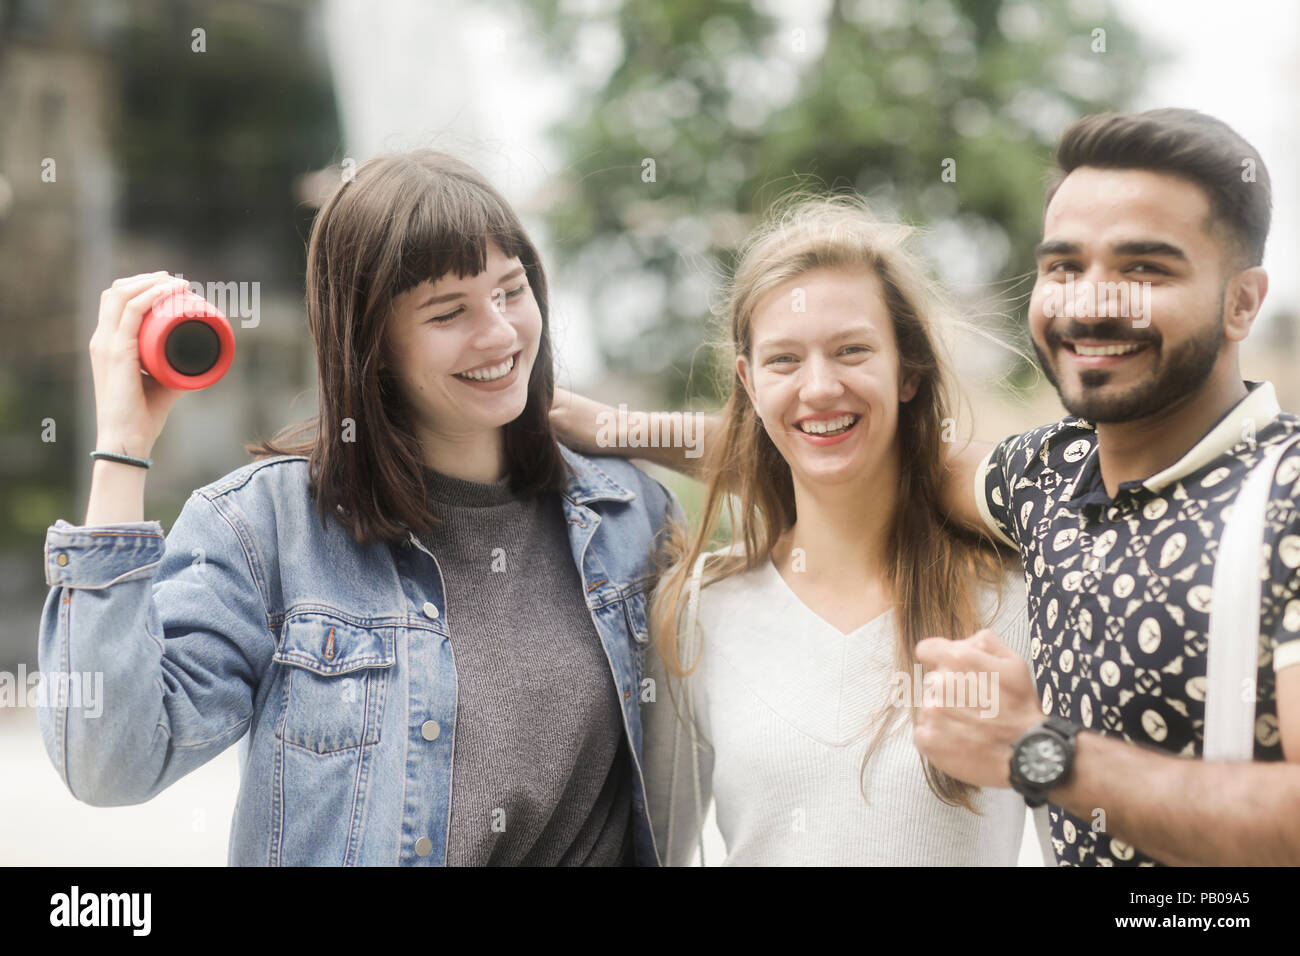 Three friends with their arms around each other listening to music Stock Photo